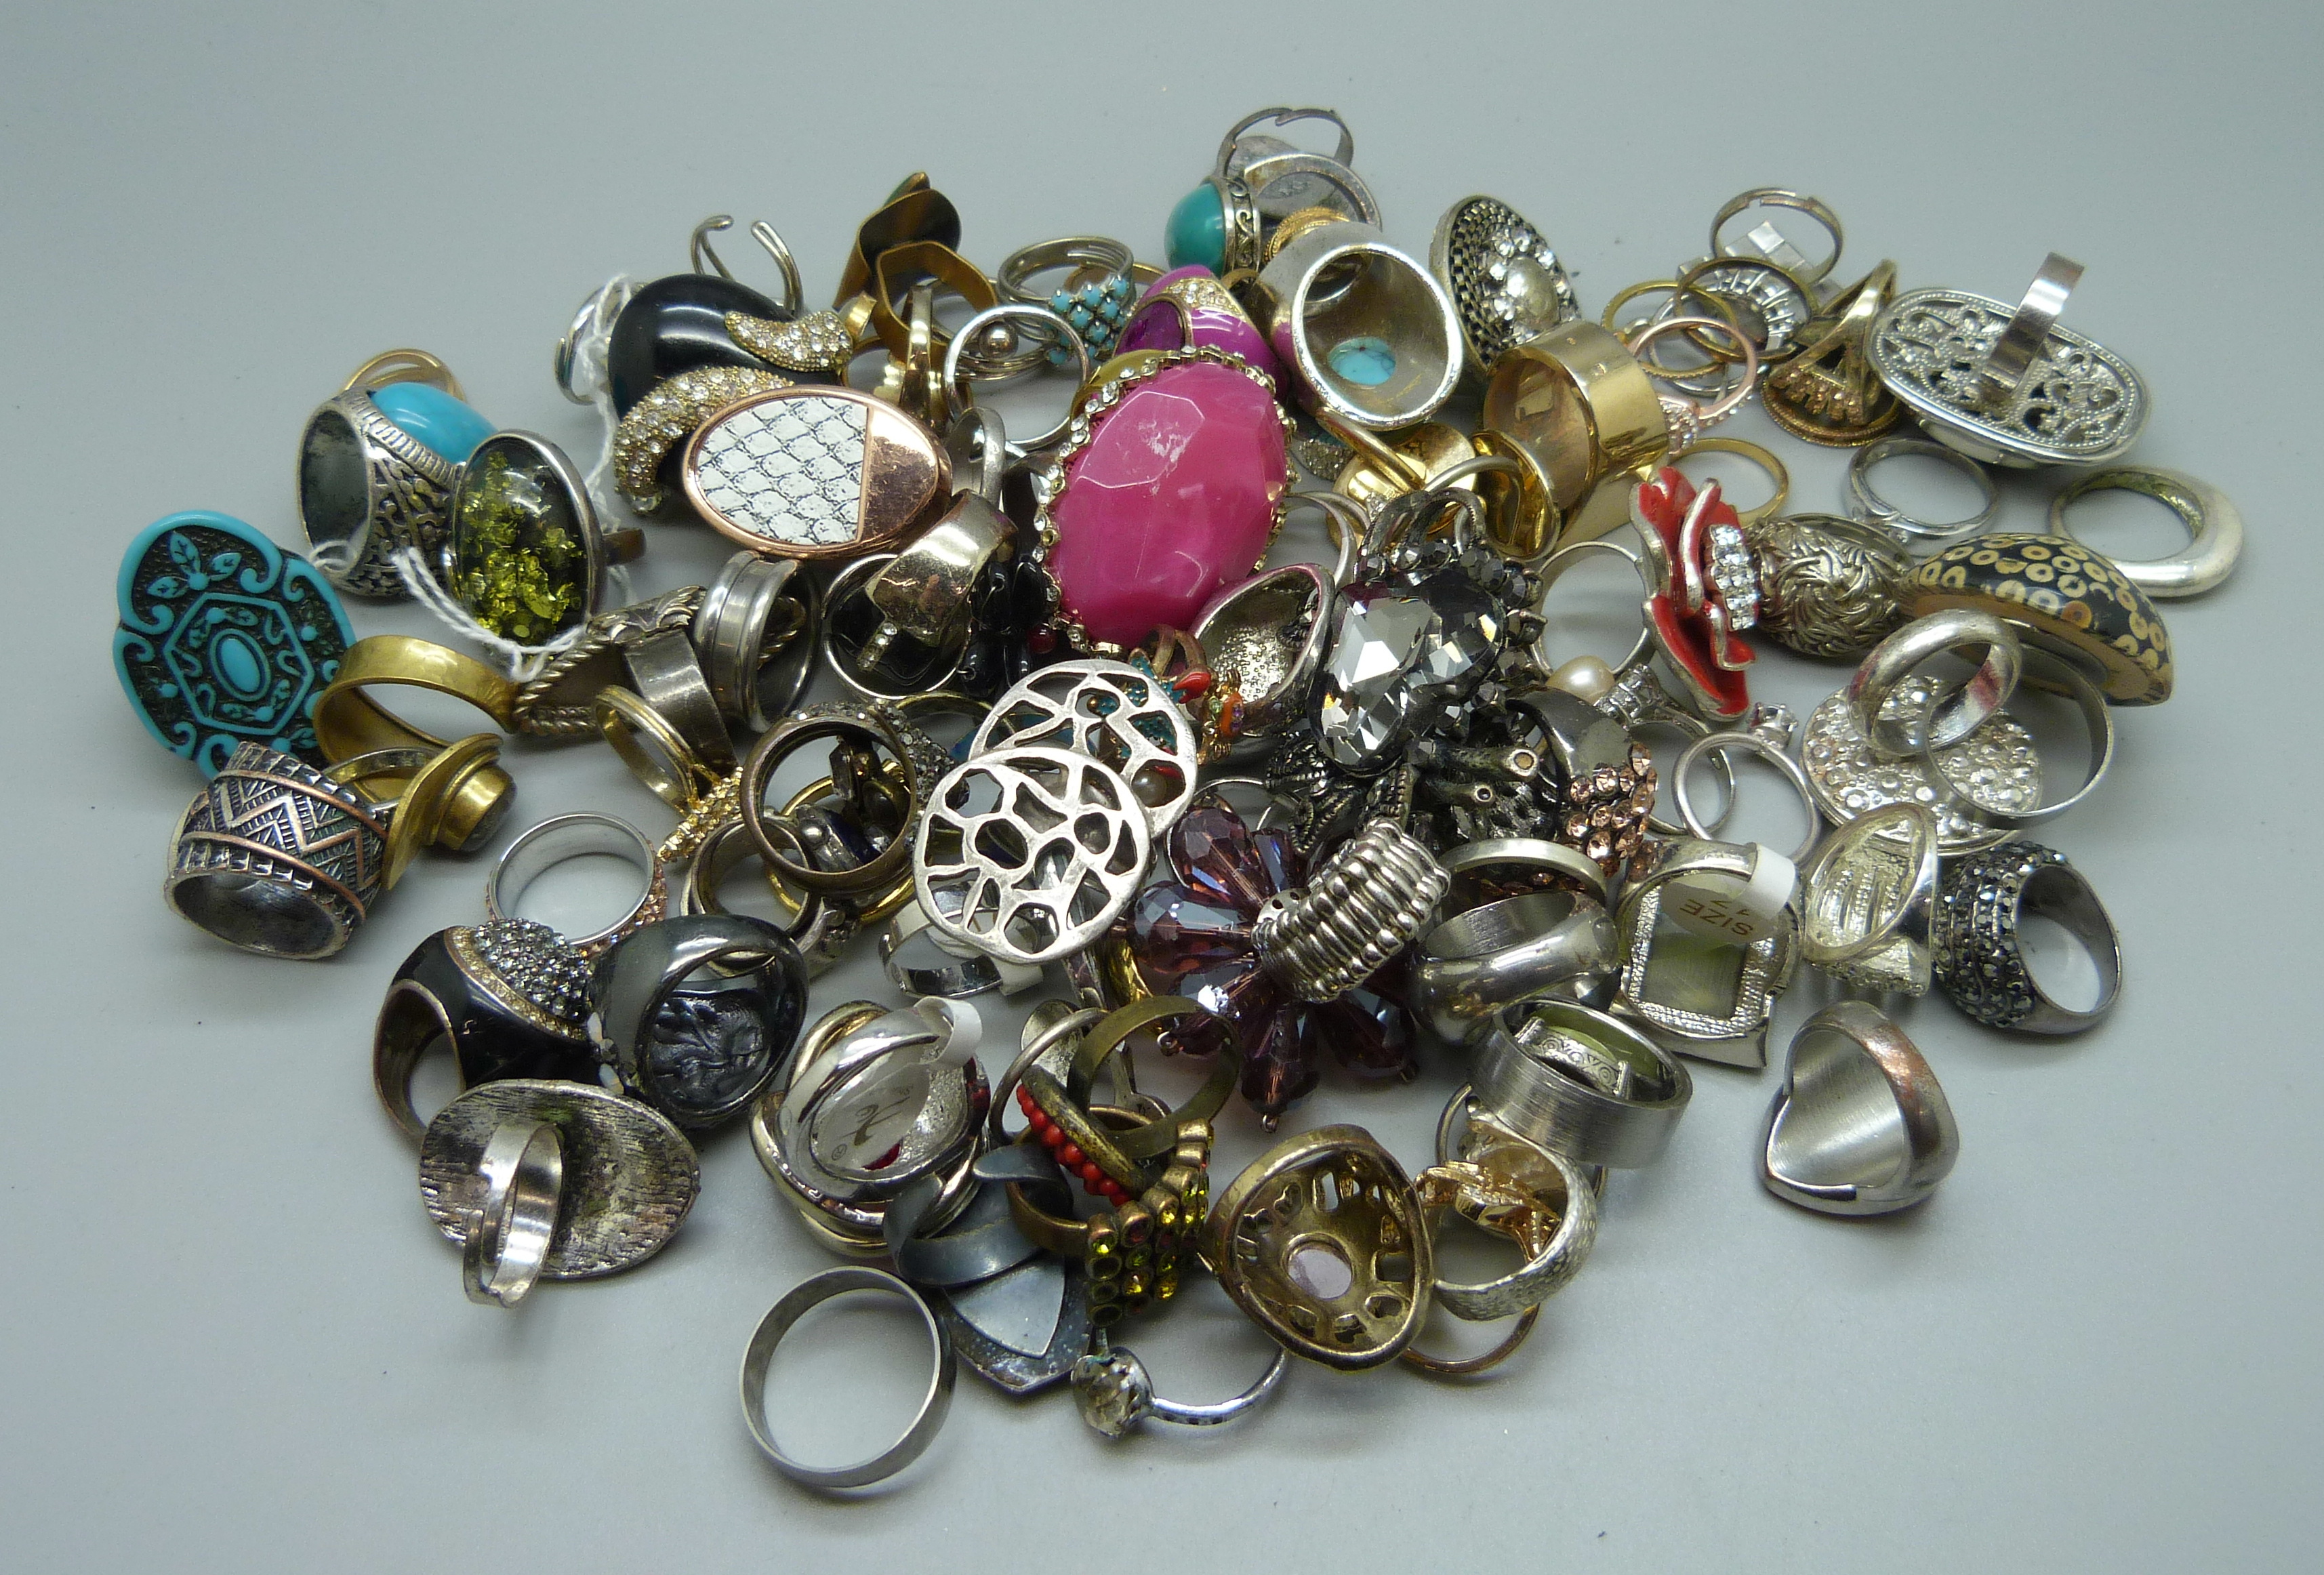 A collection of over 100 costume rings